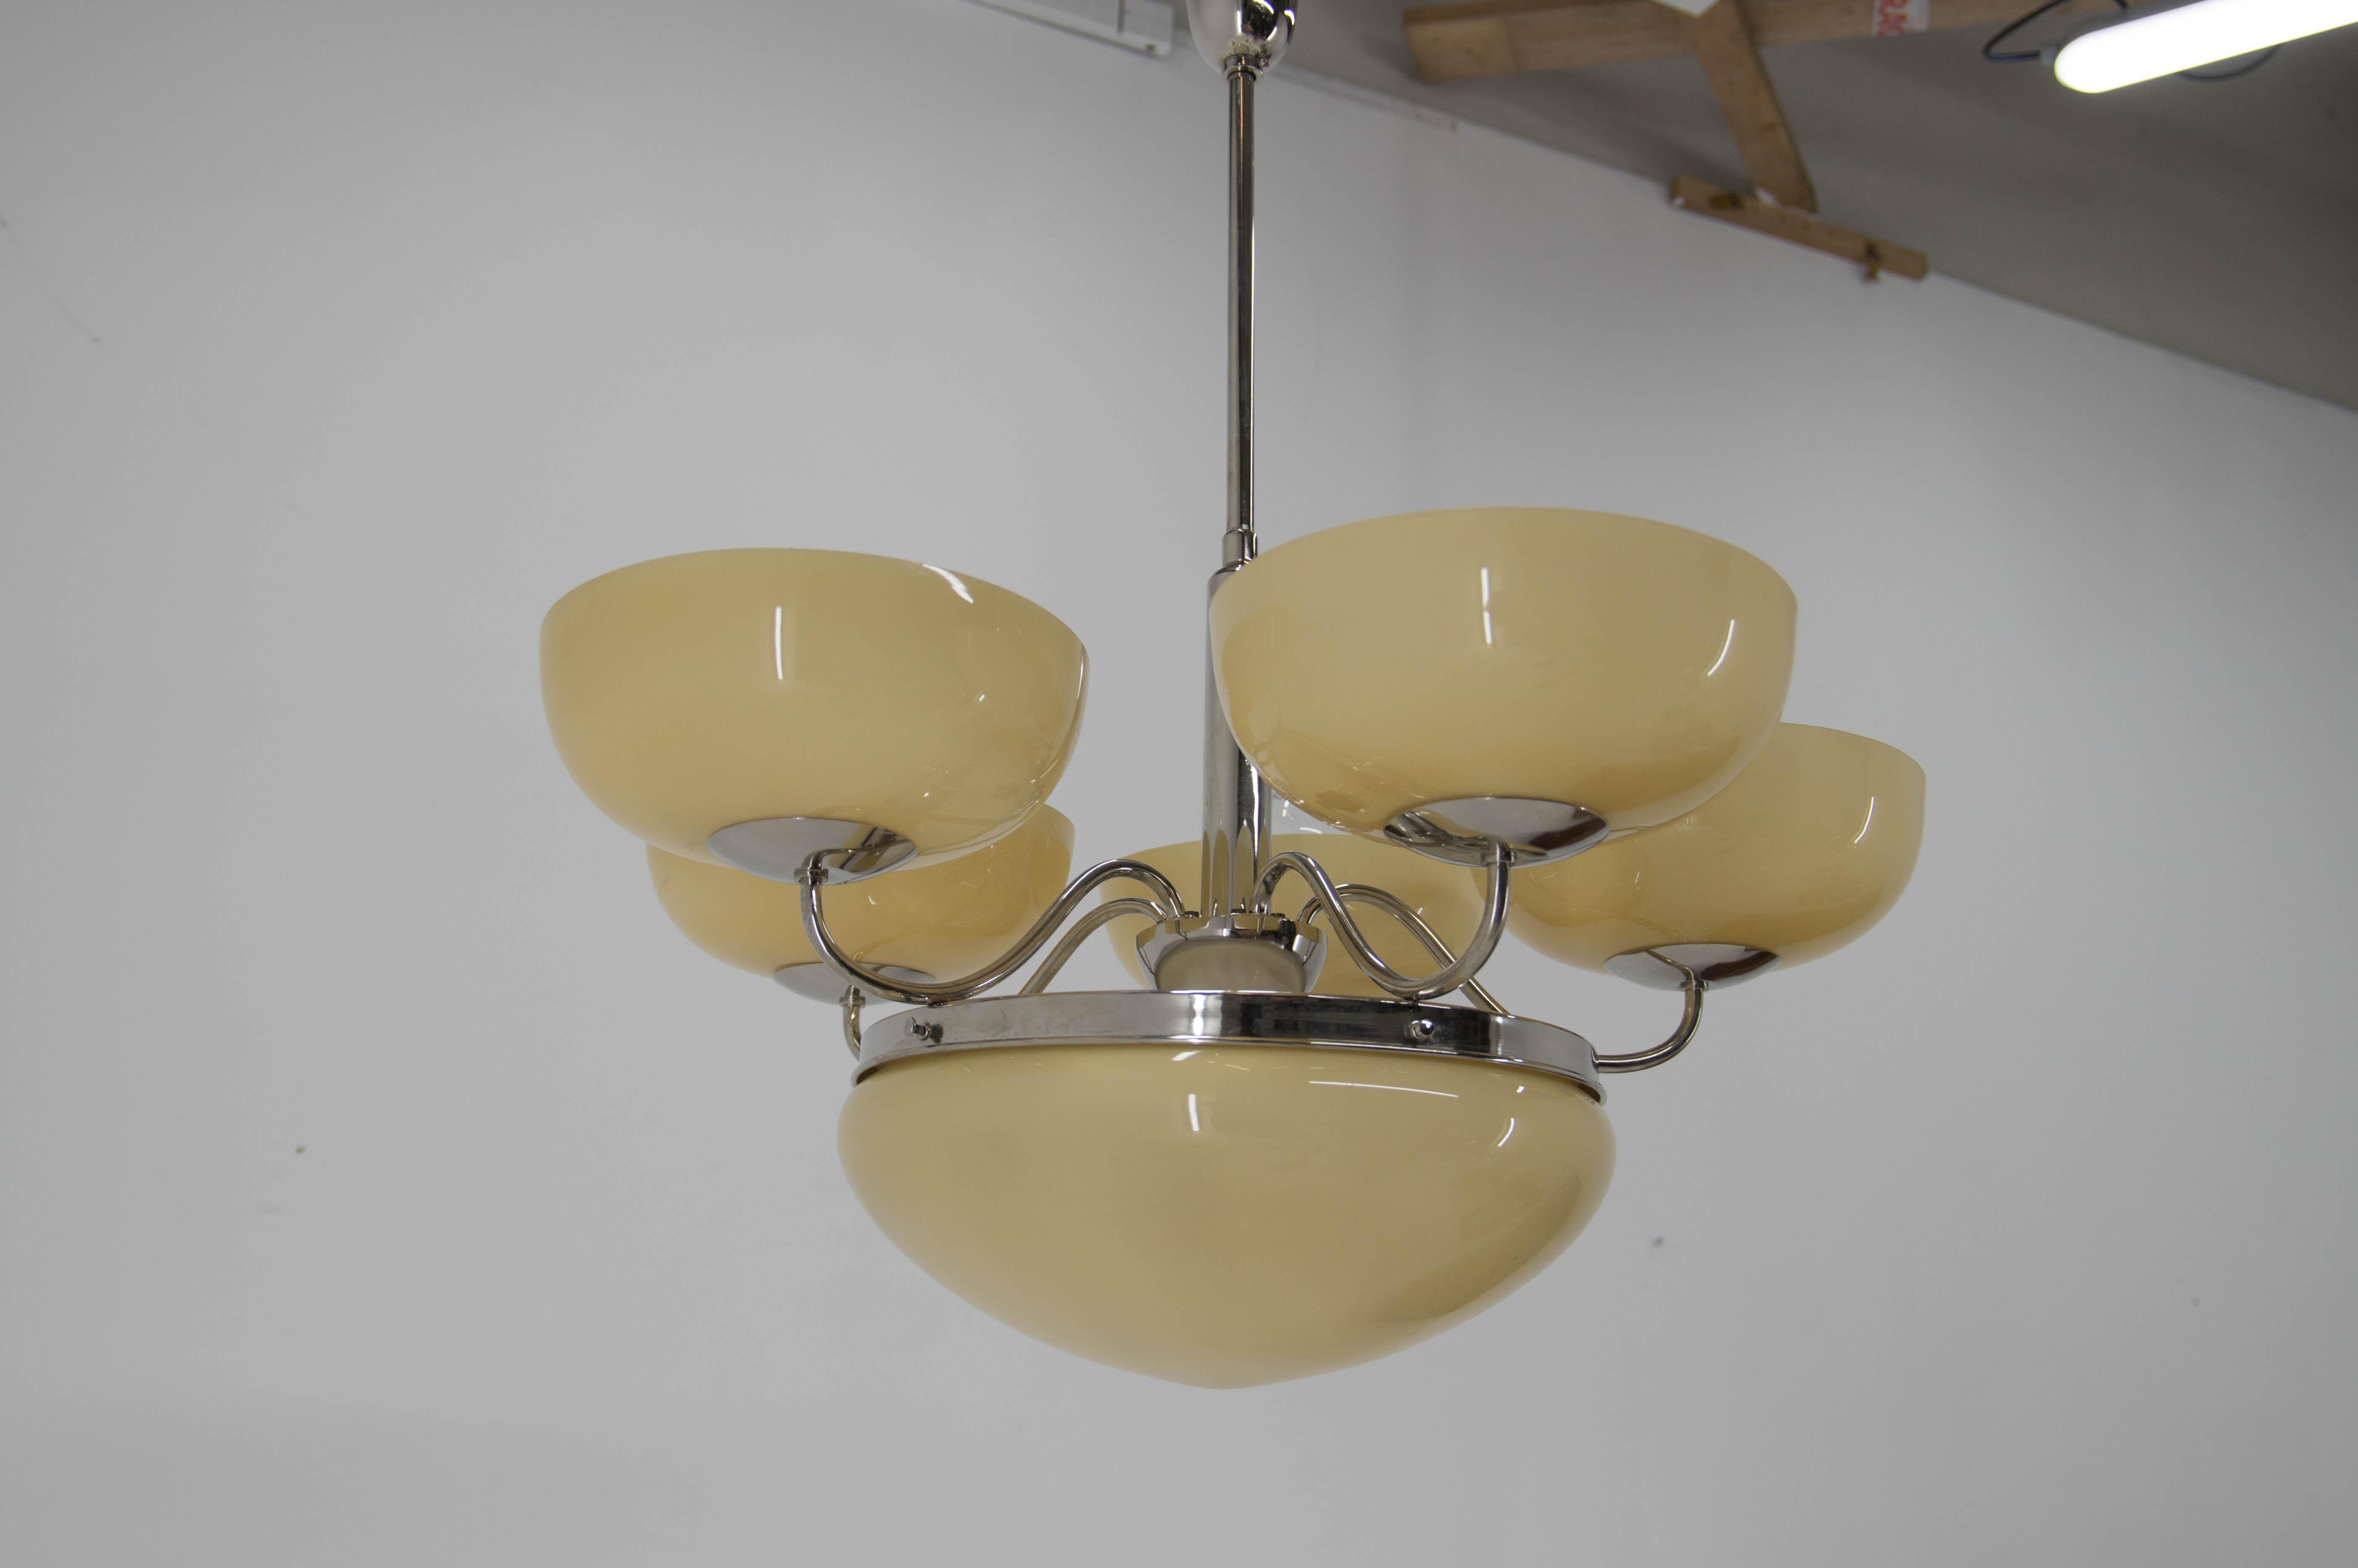 Large Art Deco Chandelier in Excellent Condition, 1930s For Sale 4